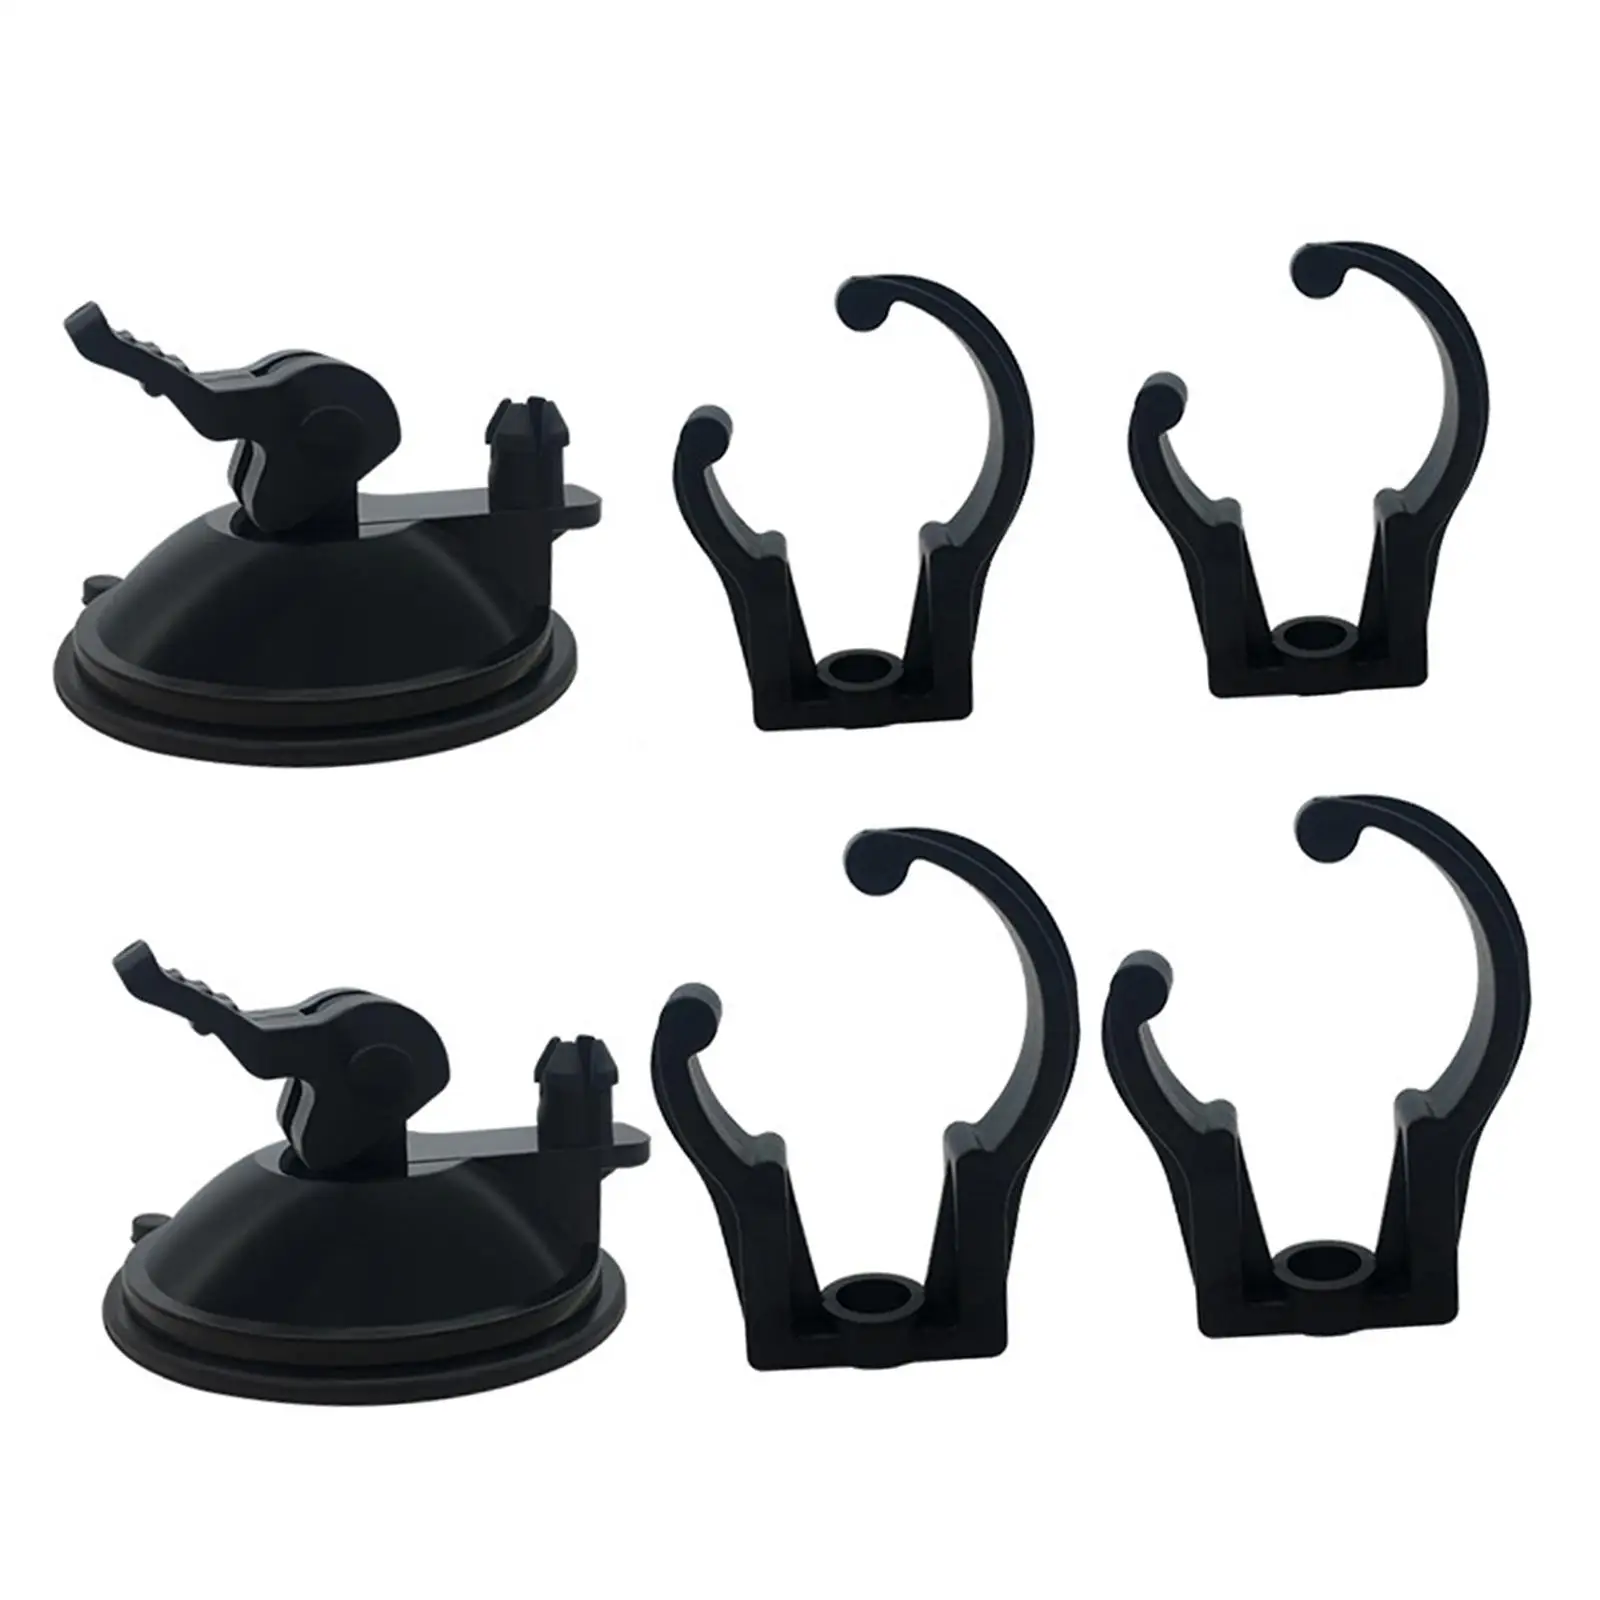 Fish Tank Suction Cup for Fish Tank Tubing Hose Tube Holders Clamps Replacement Aquarium Suction Cup Clips Water Pipes